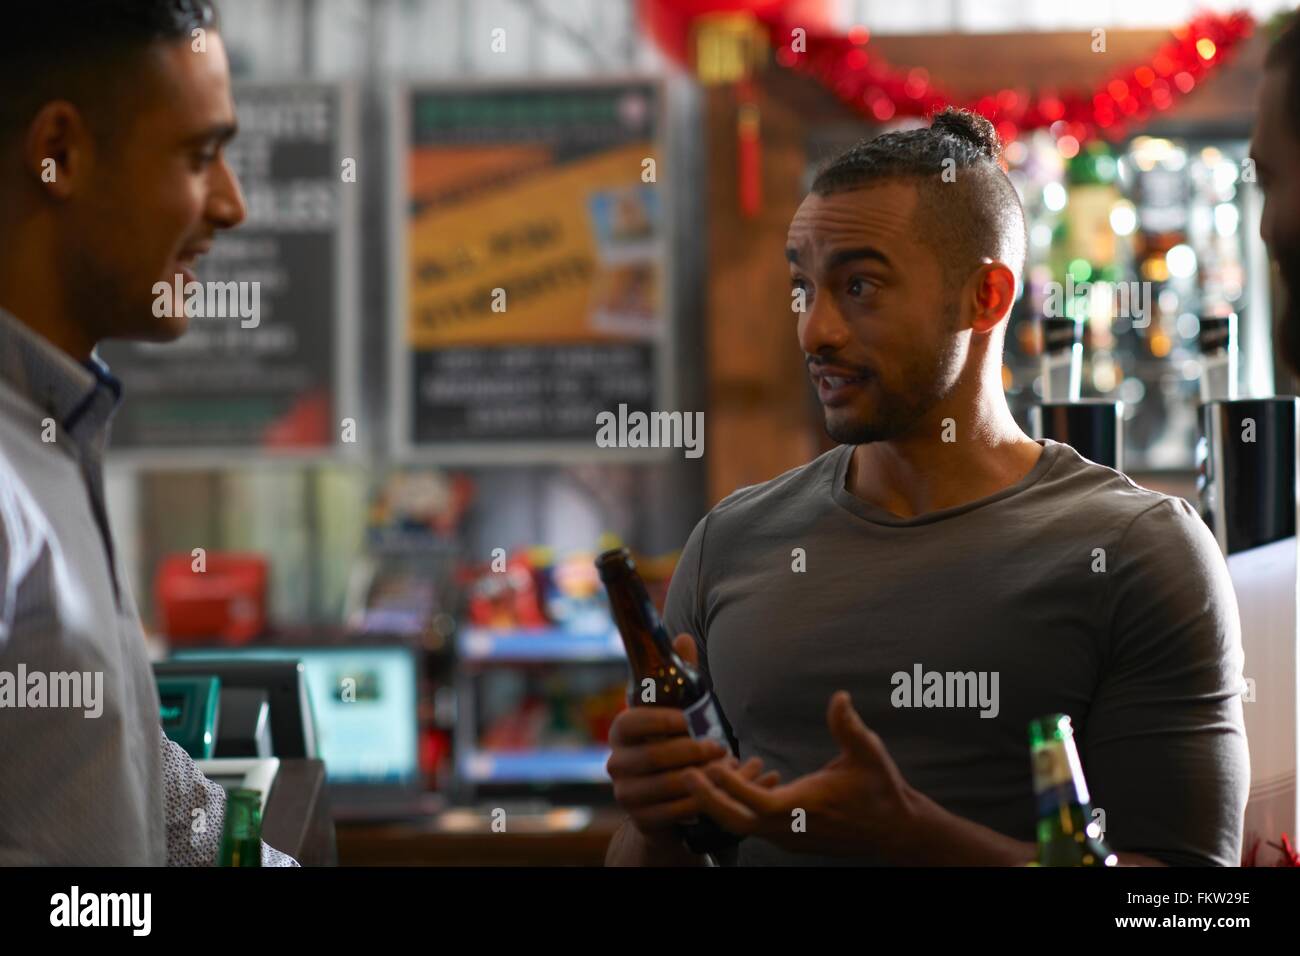 Young man in public house holding beer bottle talking to friend Stock Photo